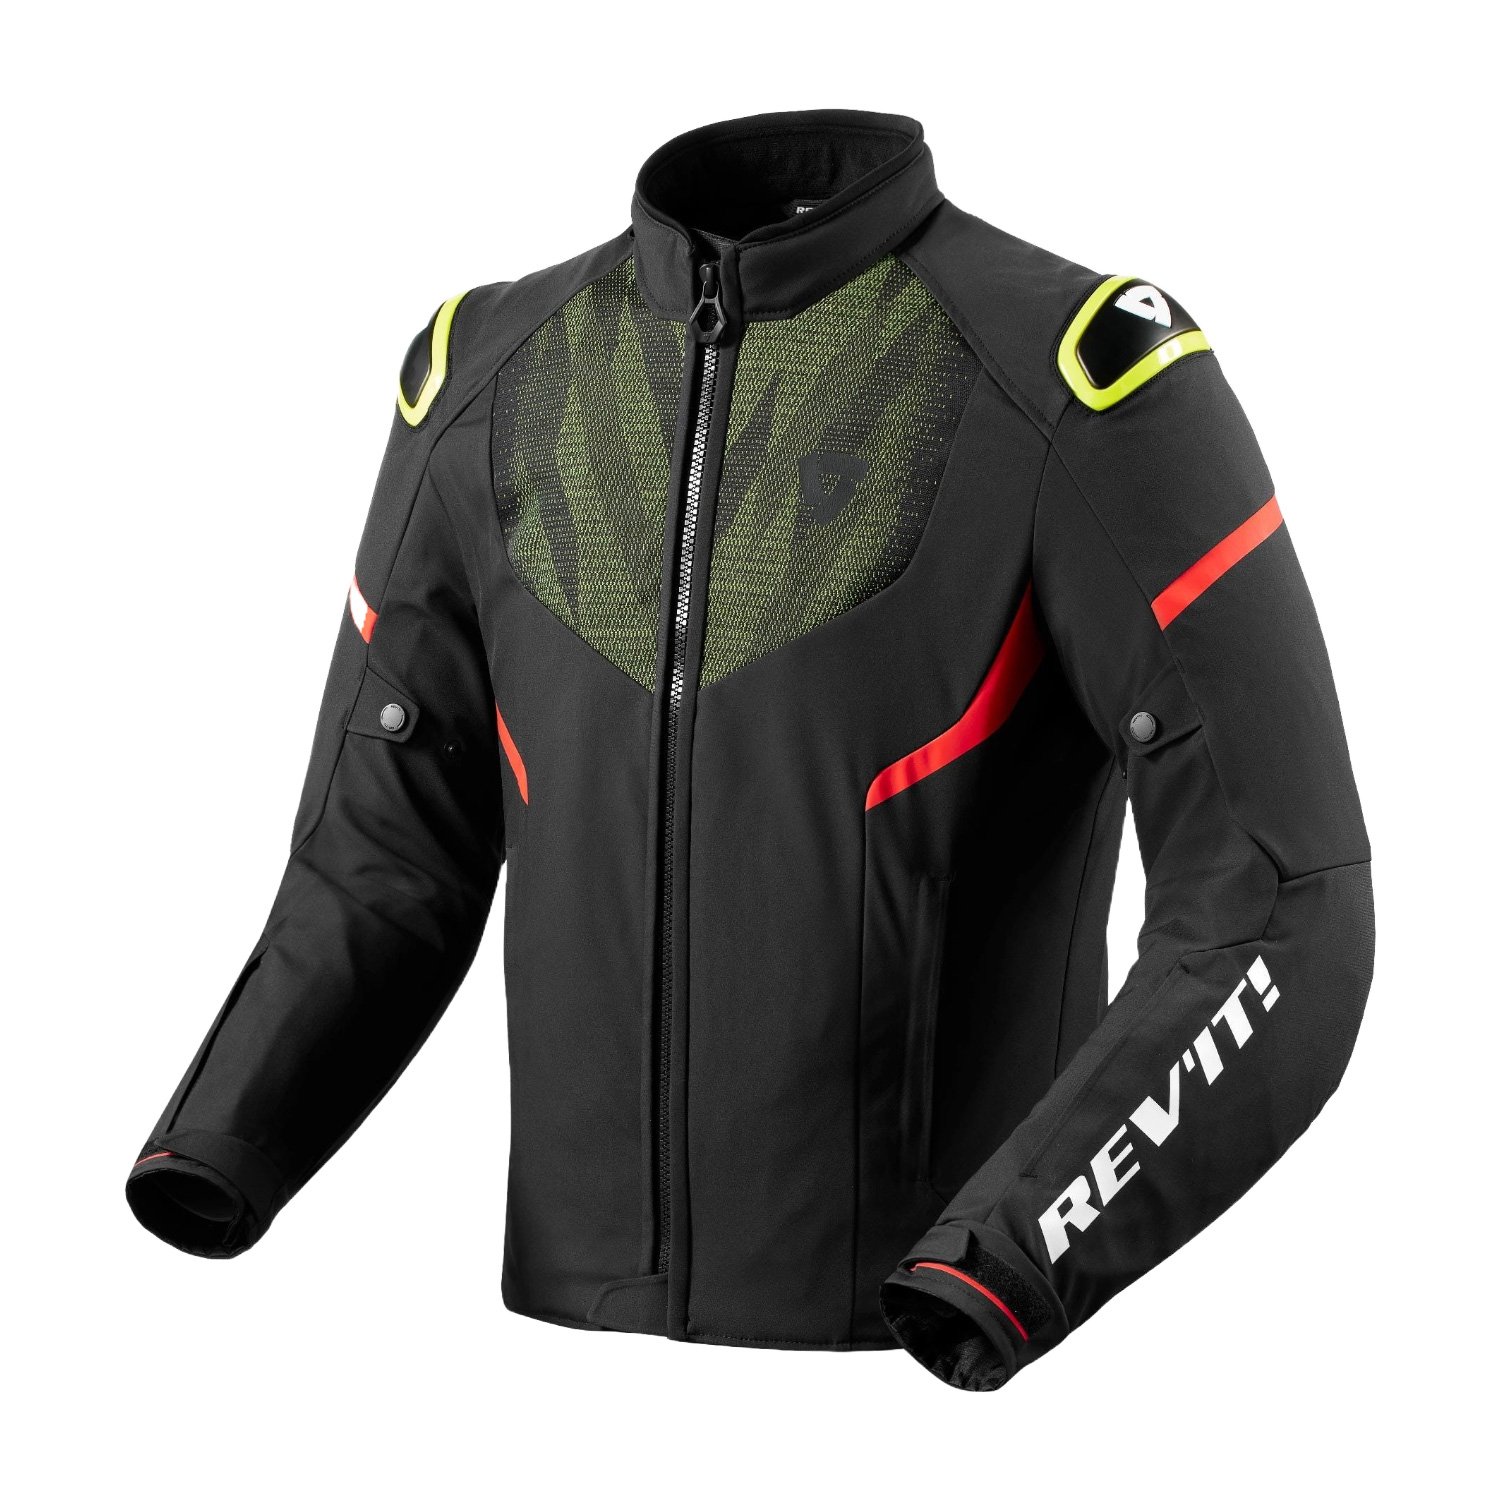 Image of REV'IT! Hyperspeed 2 H2O Jacket Black Neon Yellow Talla S